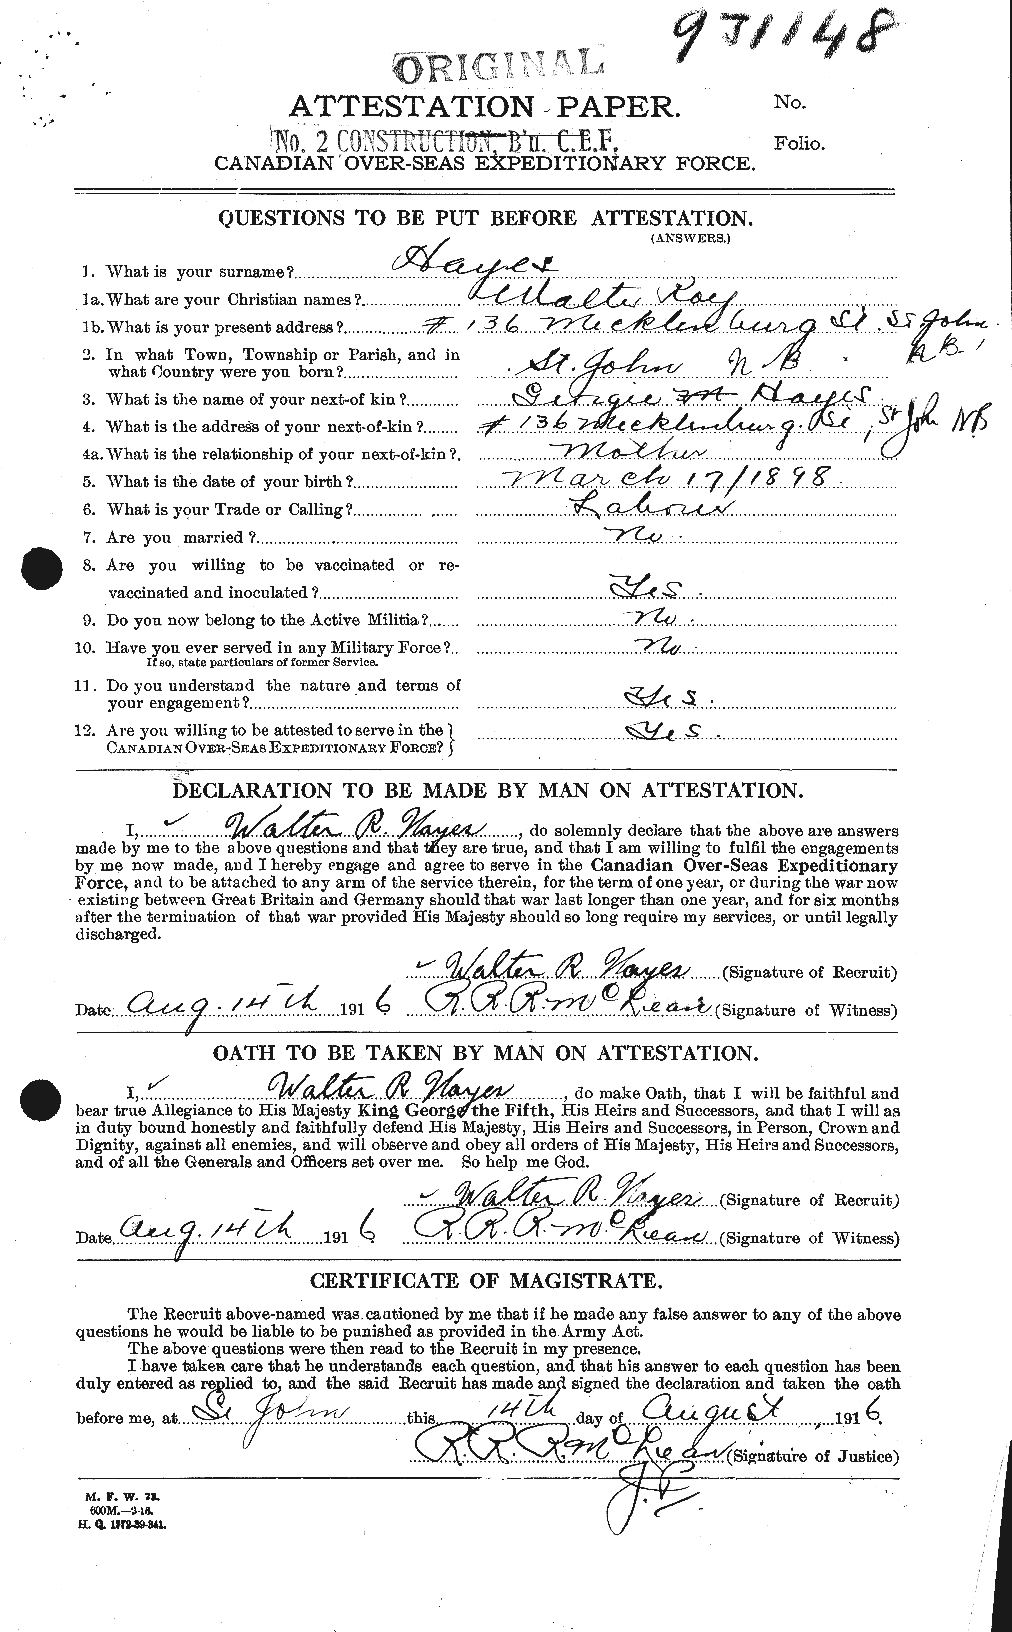 Personnel Records of the First World War - CEF 384142a